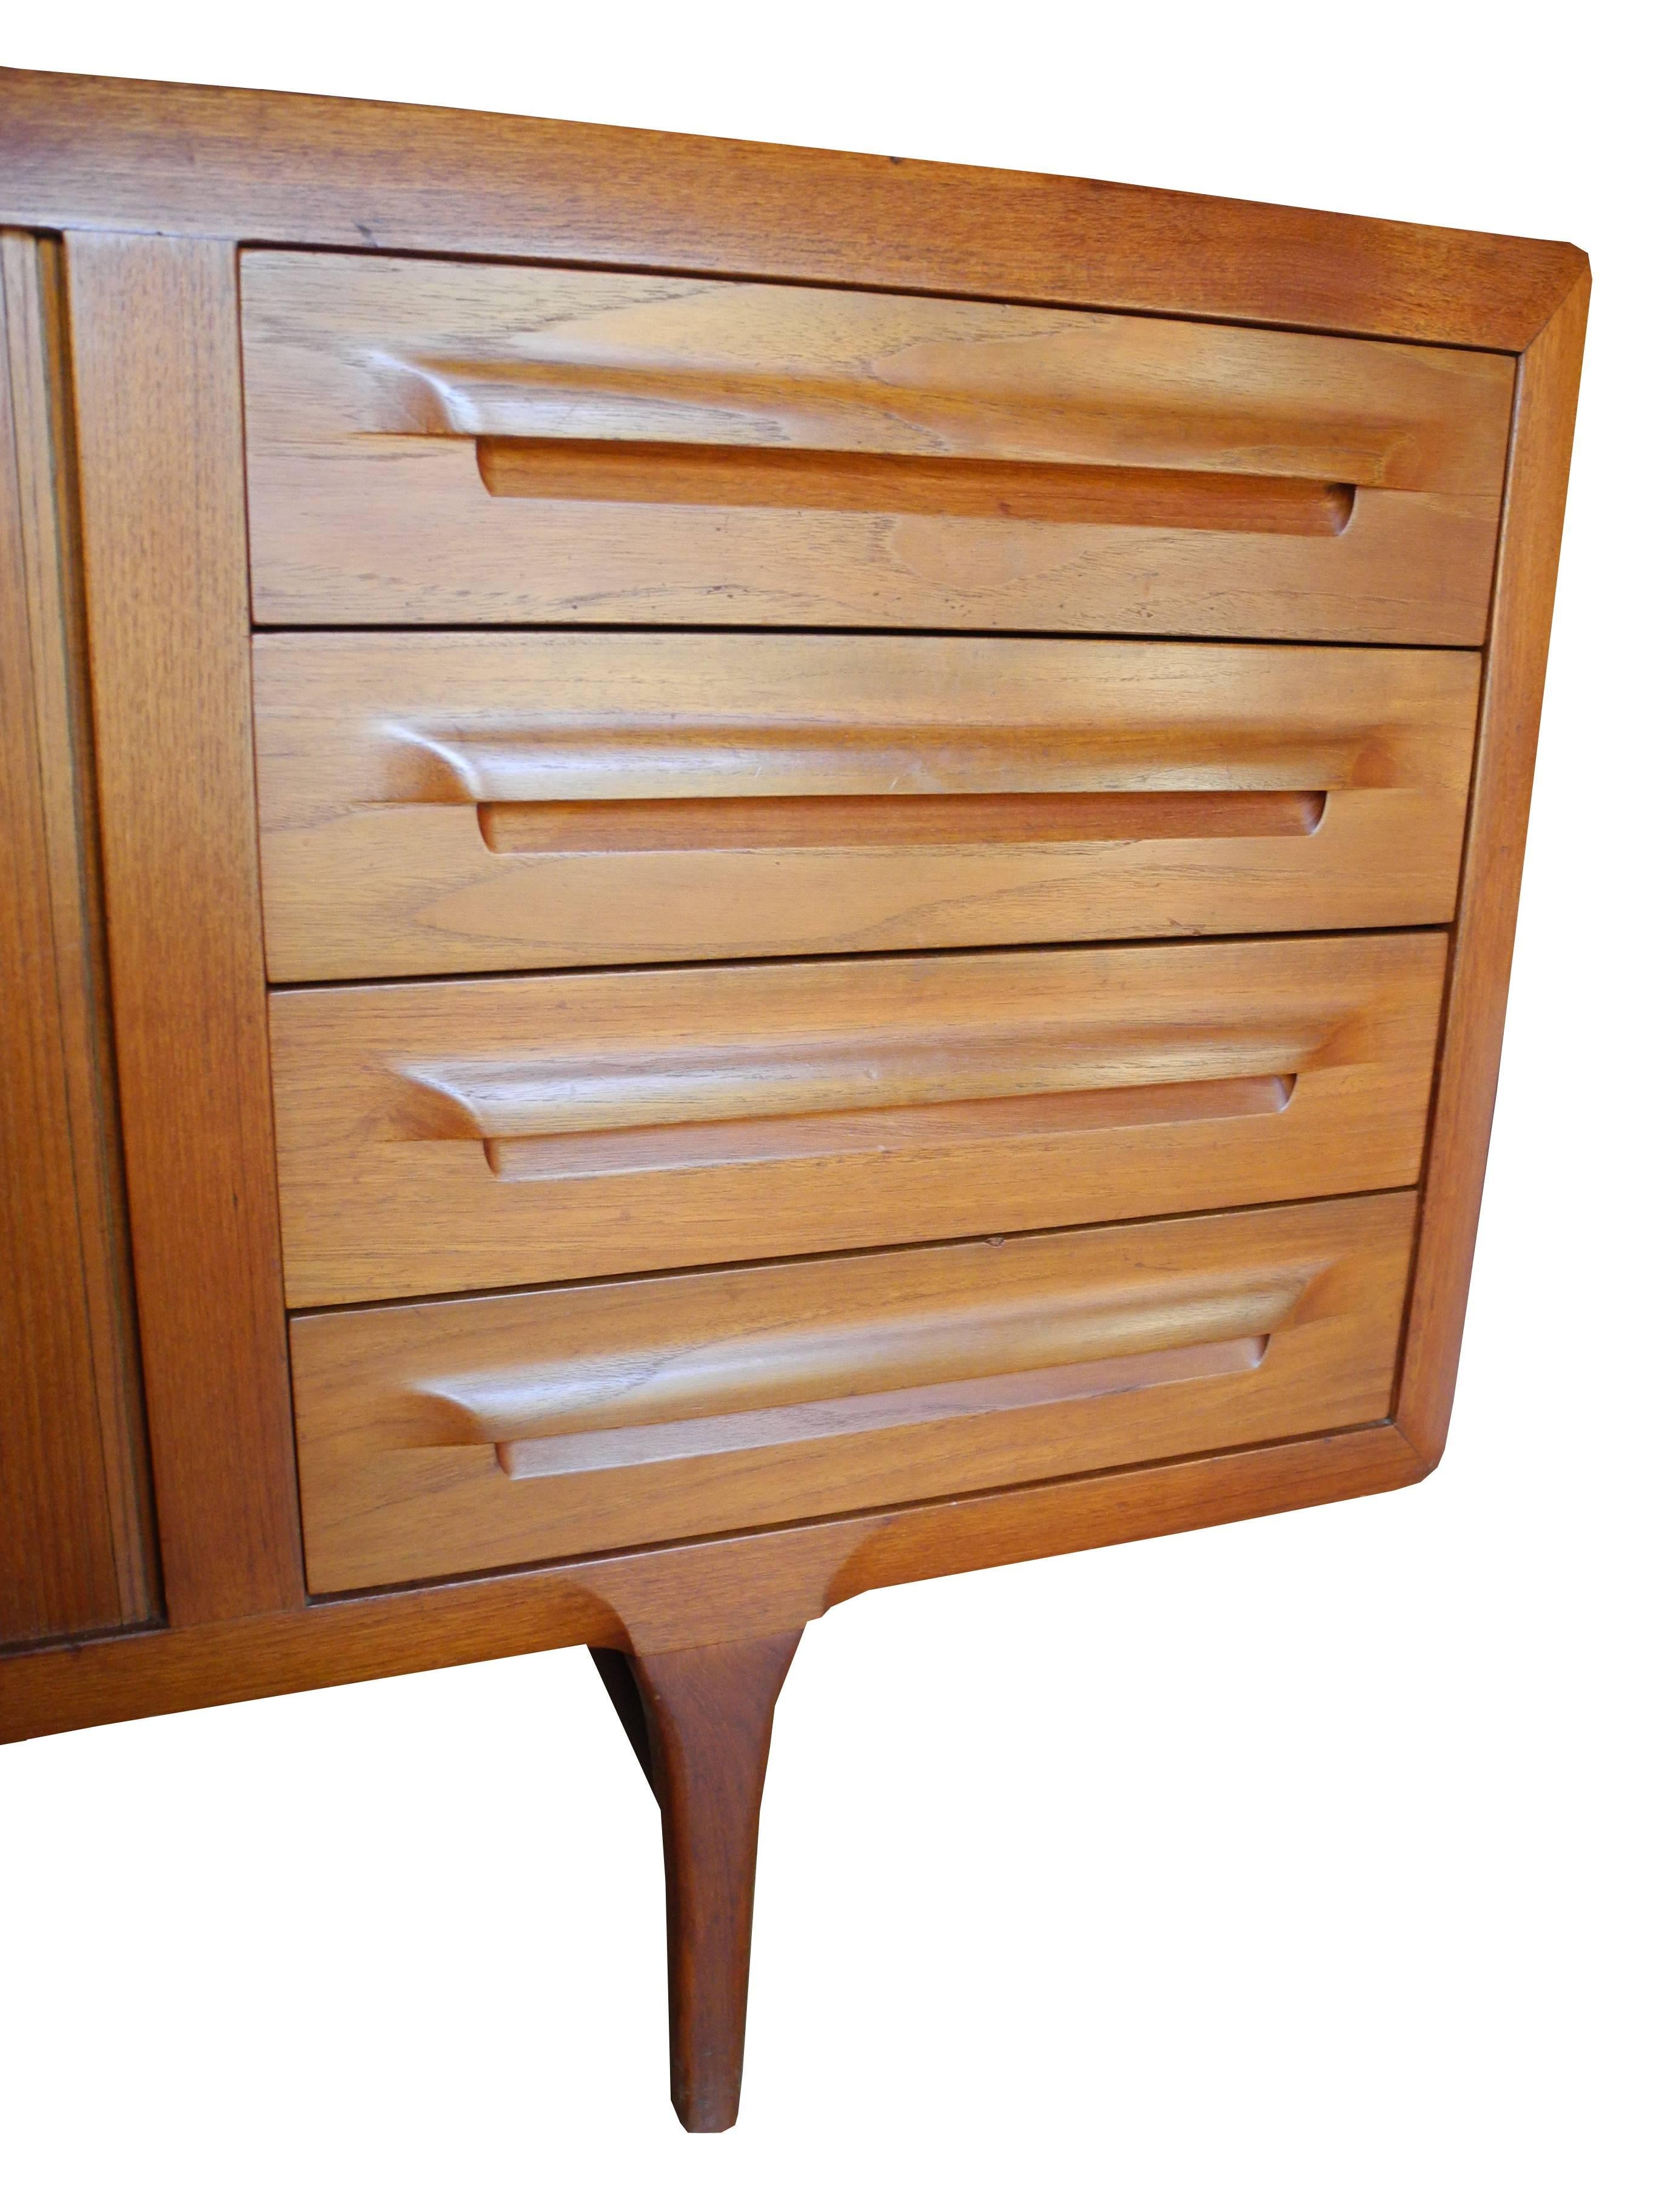 20th Century Danish Modern Teak Credenza or Sideboard by Ib Kofod-Larsen for Faarup For Sale